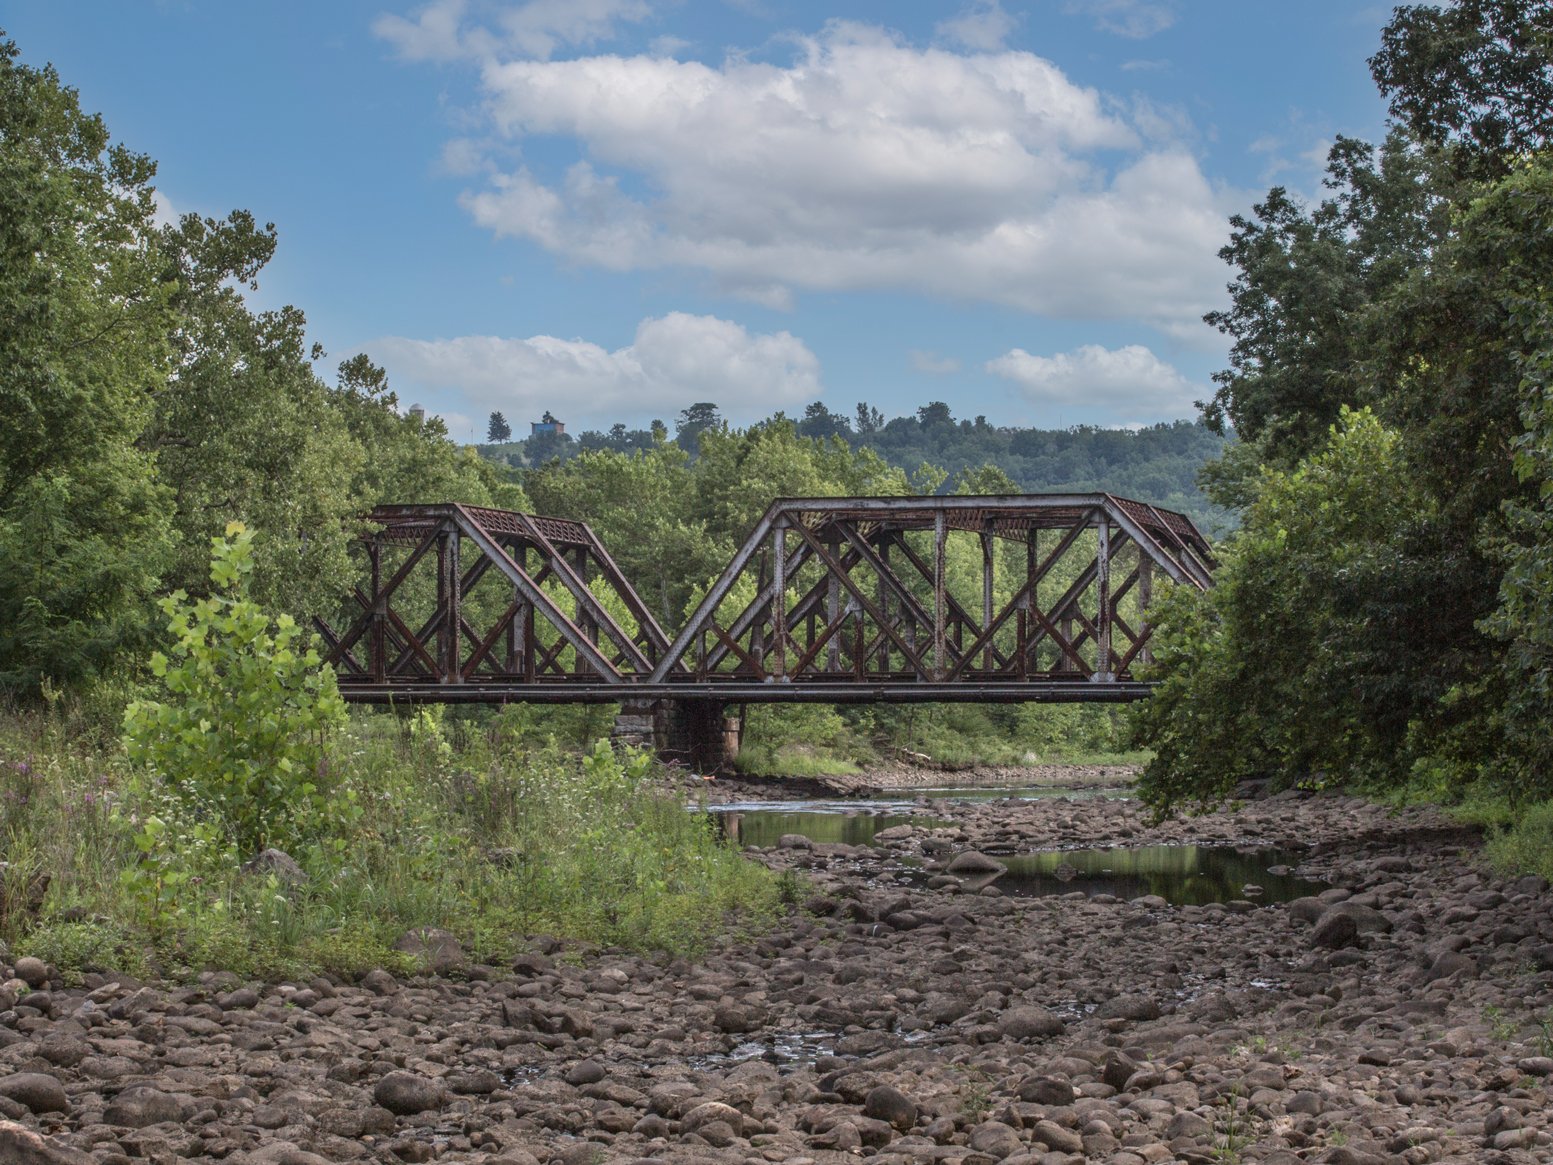  The Mohawk River at West Canada Creek,  CSX/ fmr. New York Central Line, St. Johnsville, NY |  Bright Valley  portfolio, 2017- 